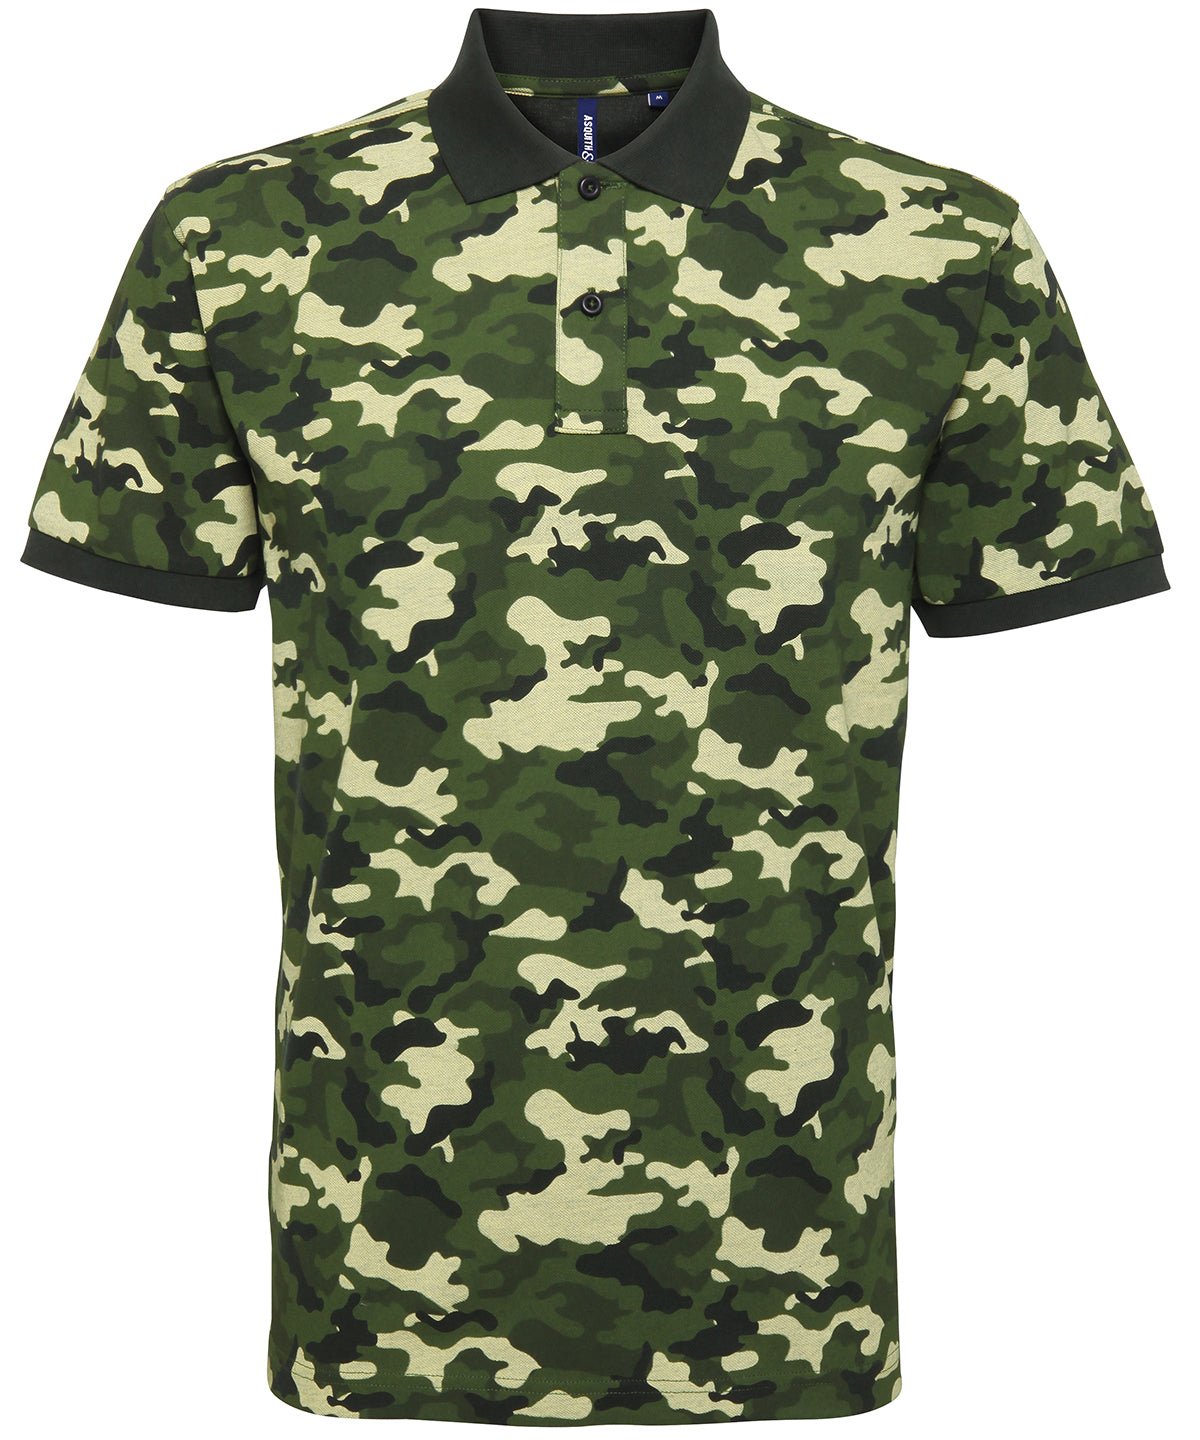 Personalised Polo Shirts - Camouflage Asquith & Fox Men's camo piqué polo